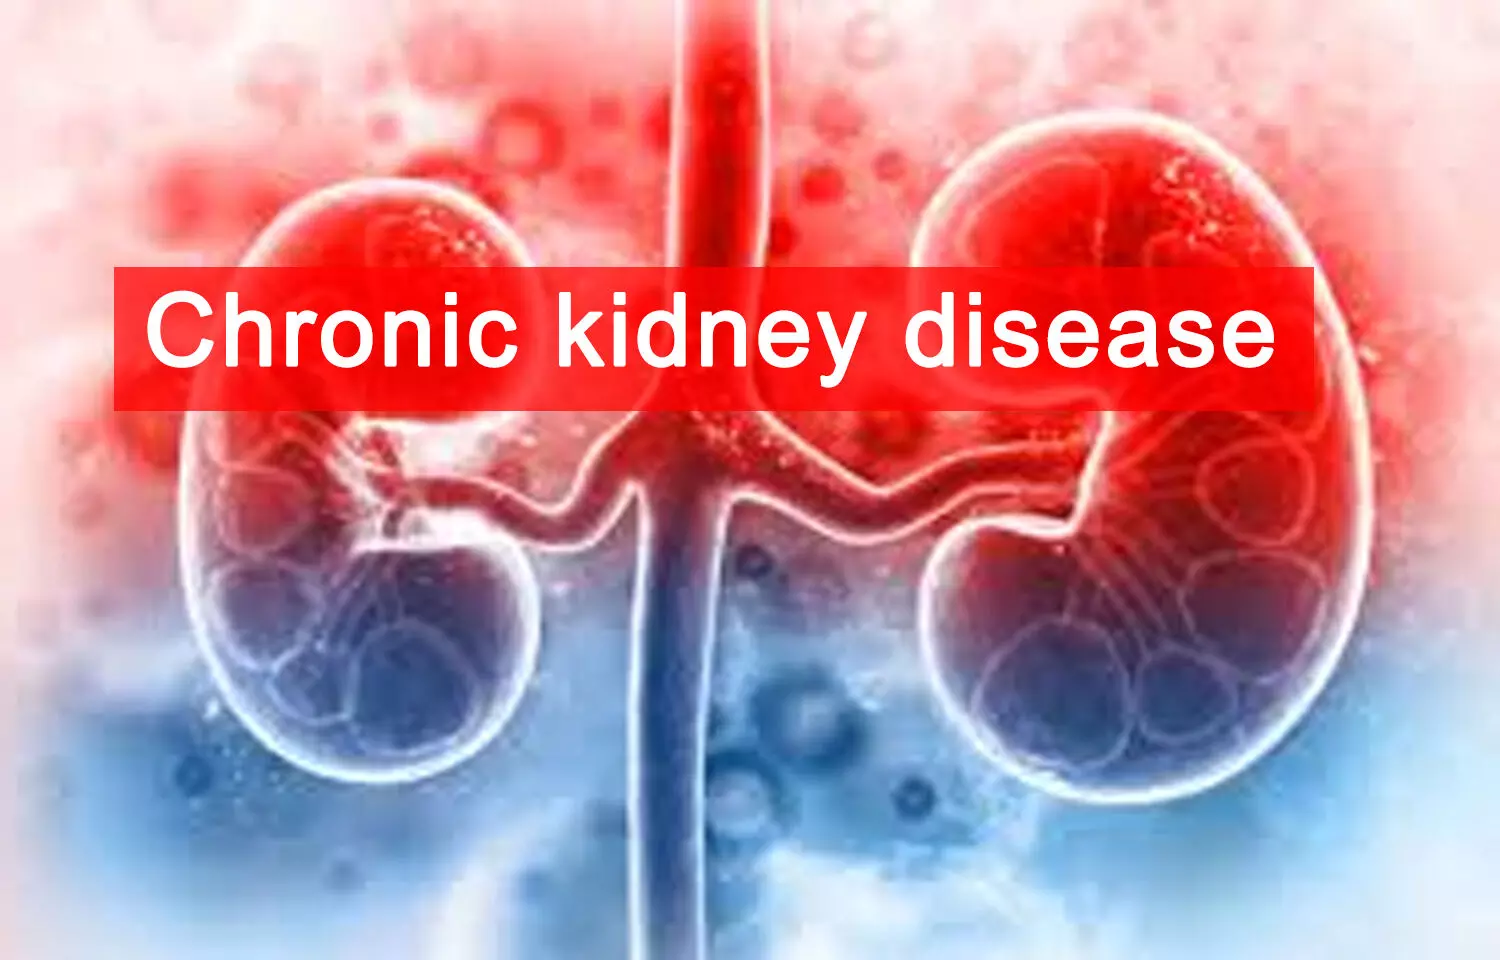 Urinary biomarkers predict severe kidney injury in patients hospitalized with COVID-19